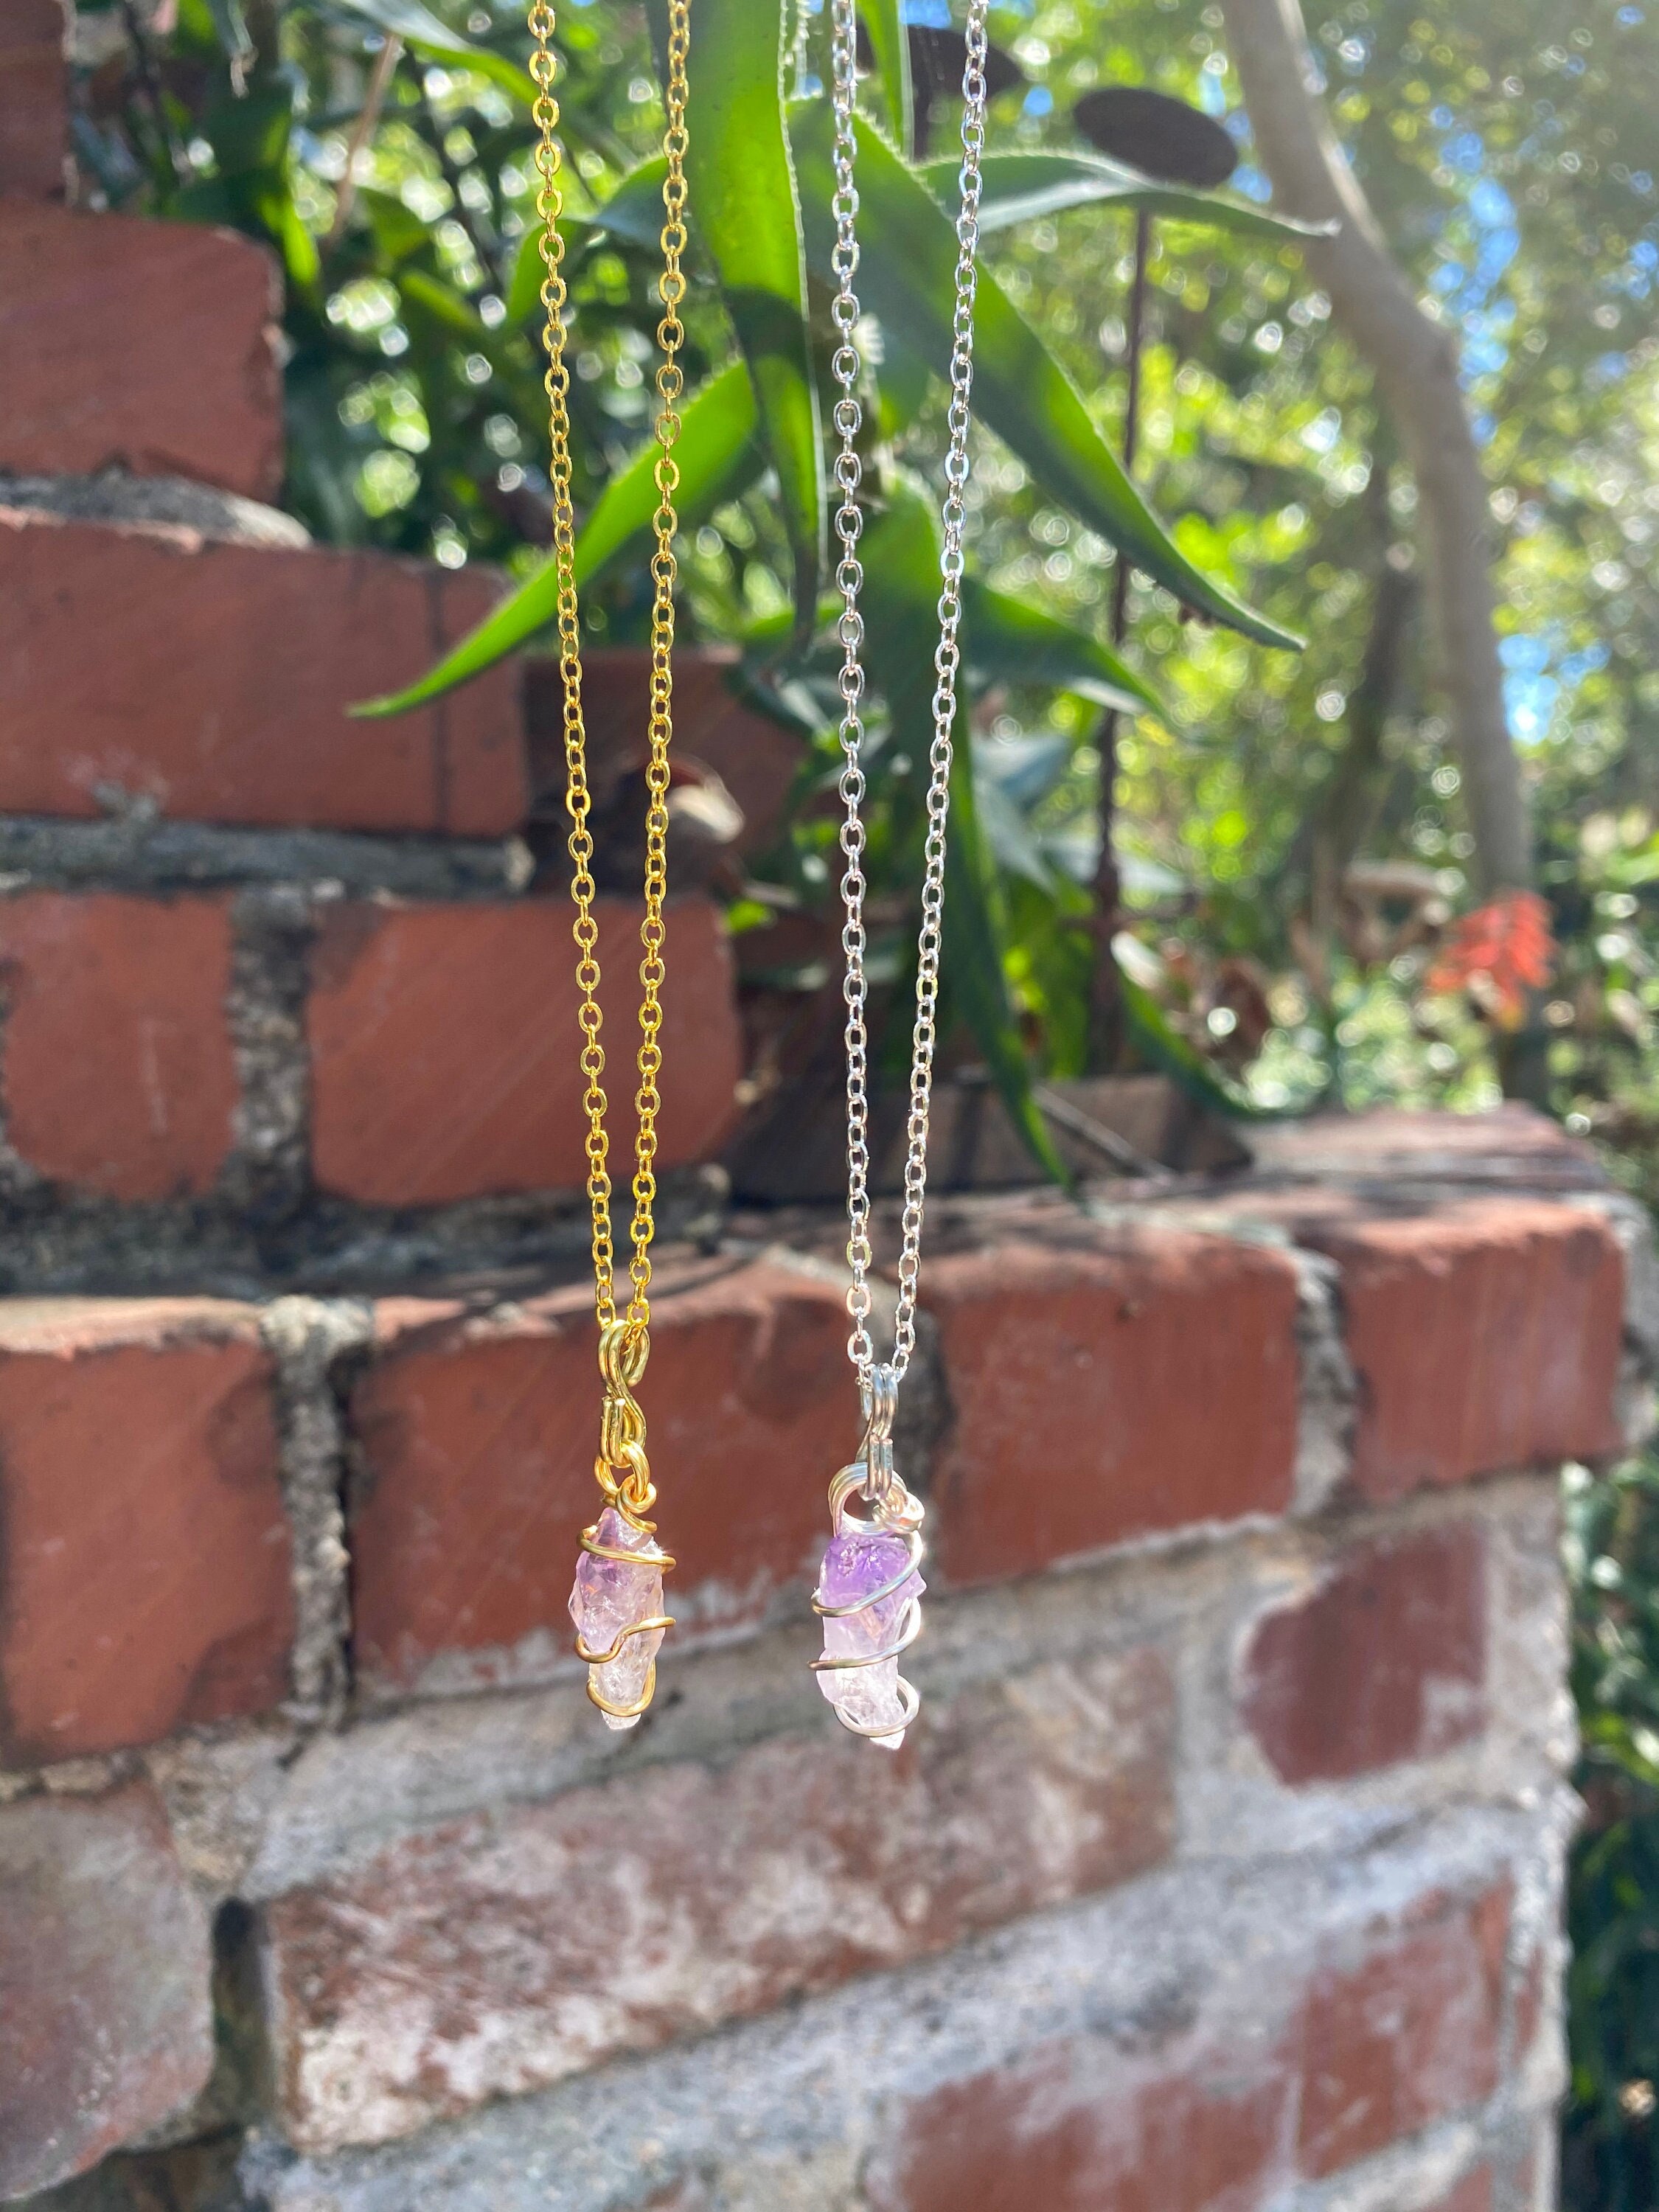 AGNN Raw Rock Mineral Crystal Necklaces Amethysts Pink Quartz Pendant  Necklaces (Metal Color : Green Fluorite)